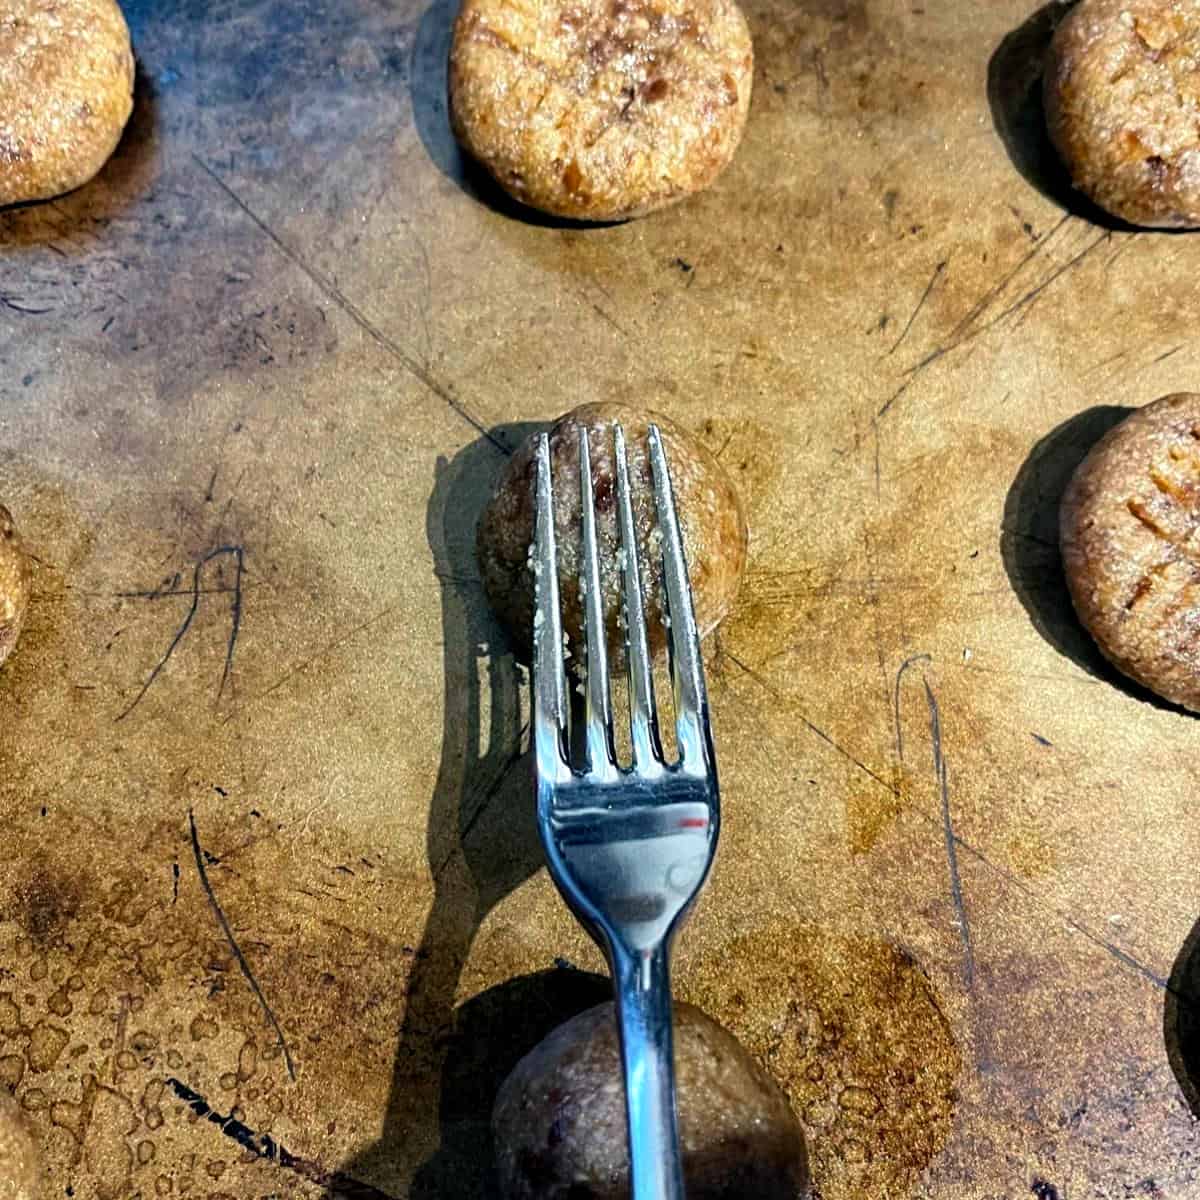 Pressing on cookie dough balls with tines of fork.